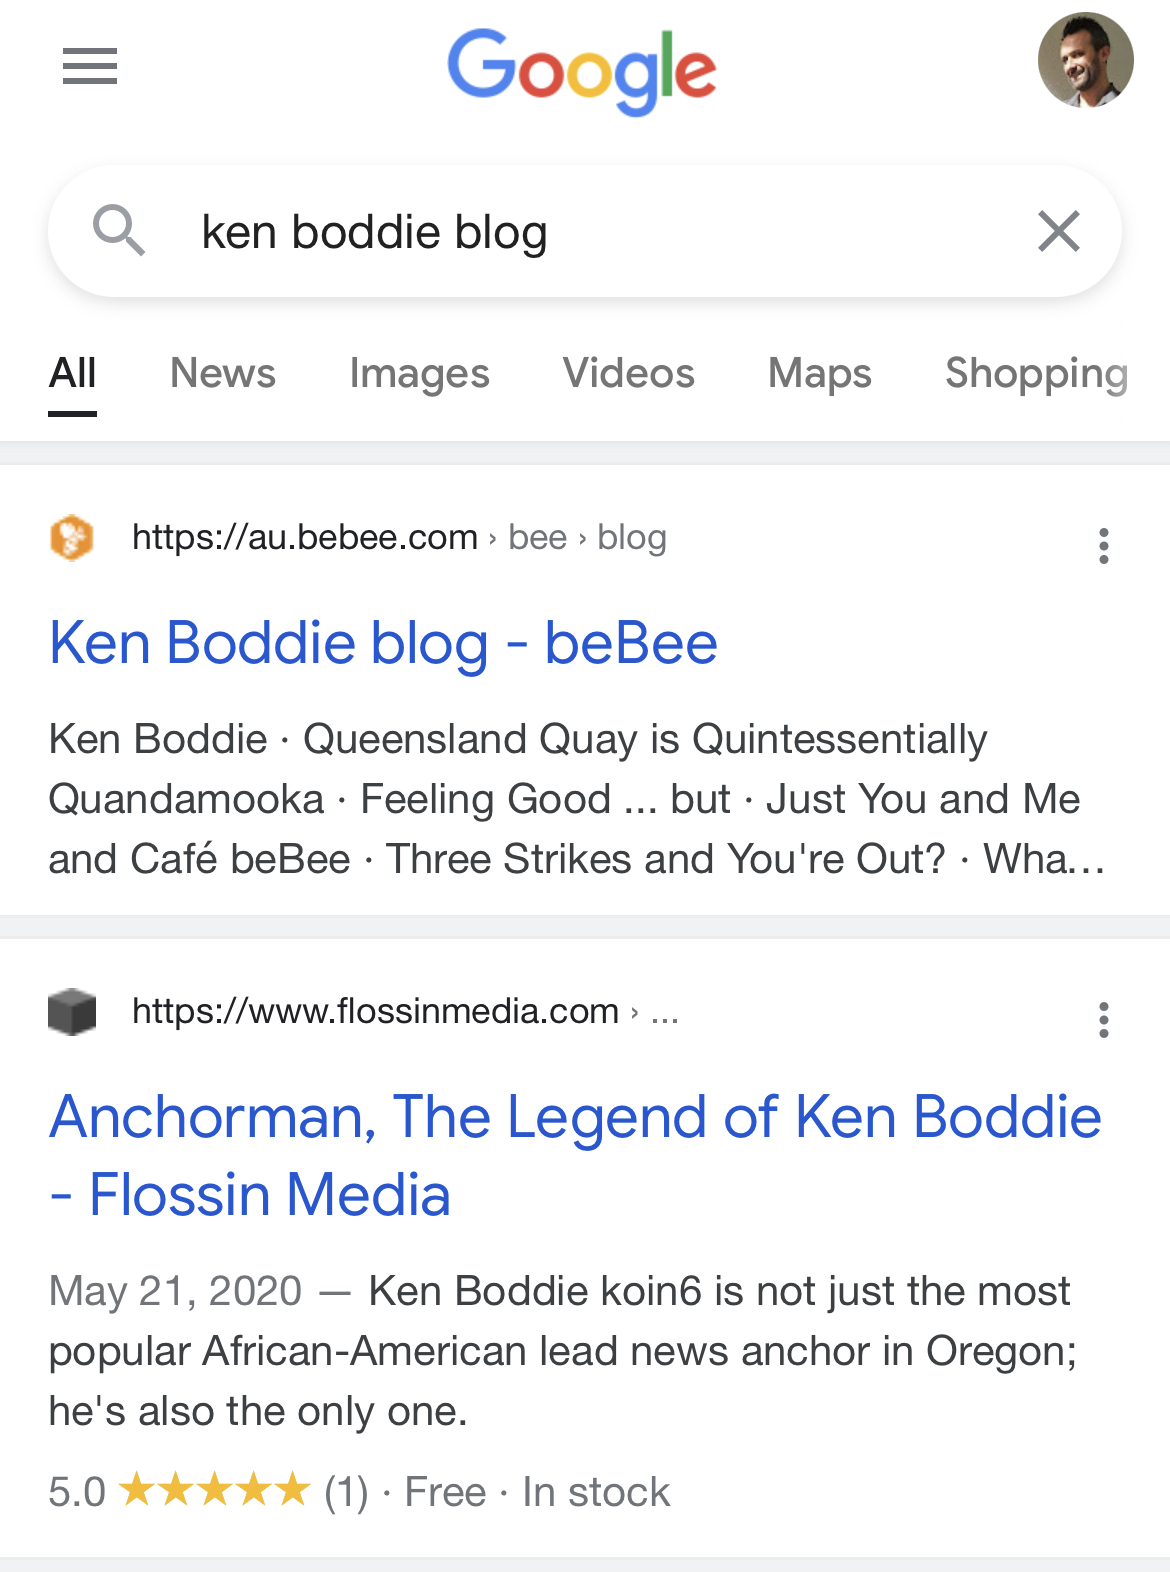 = Google >
Q_ ken boddie blog X

All News Images Videos Maps Shopping

LJ) https://au.bebee.com > bee > blog

Ken Boddie blog - beBee

Ken Boddie - Queensland Quay is Quintessentially
Quandamooka - Feeling Good ... but - Just You and Me
and Café beBee - Three Strikes and You're Out? - Wha...

® https://www.flossinmedia.com > ...

Anchorman, The Legend of Ken Boddie
- Flossin Media
May 21, 2020 — Ken Boddie koin6 is not just the most

popular African-American lead news anchor in Oregon;
he's also the only one.

5.0 (1) - Free - In stock